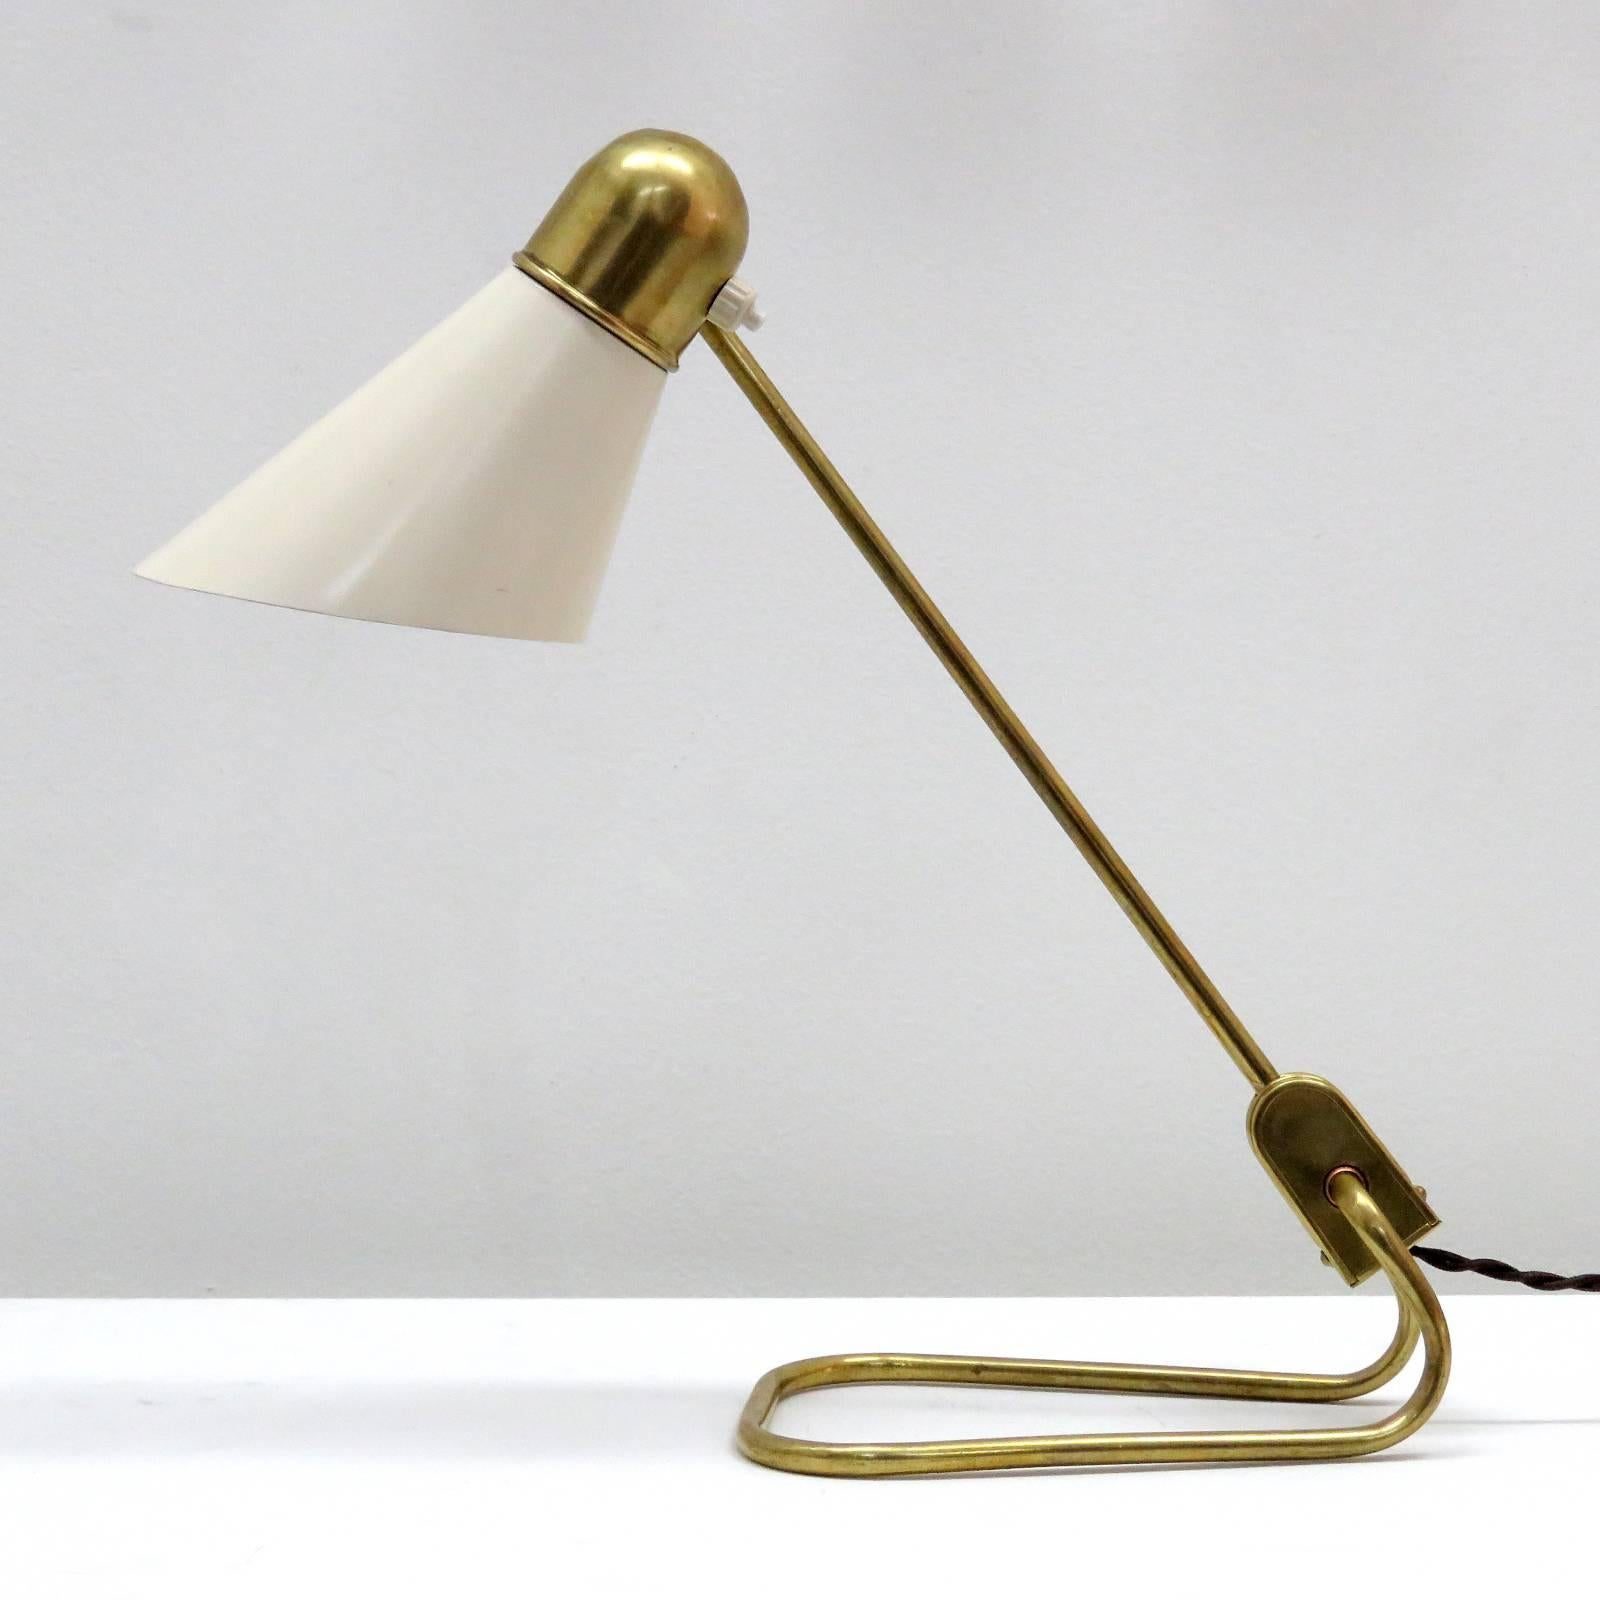 Articulate asymmetric table lamp by Jacques Biny for Jumo in brass and enameled metal, with individual on/off switch at the shade.